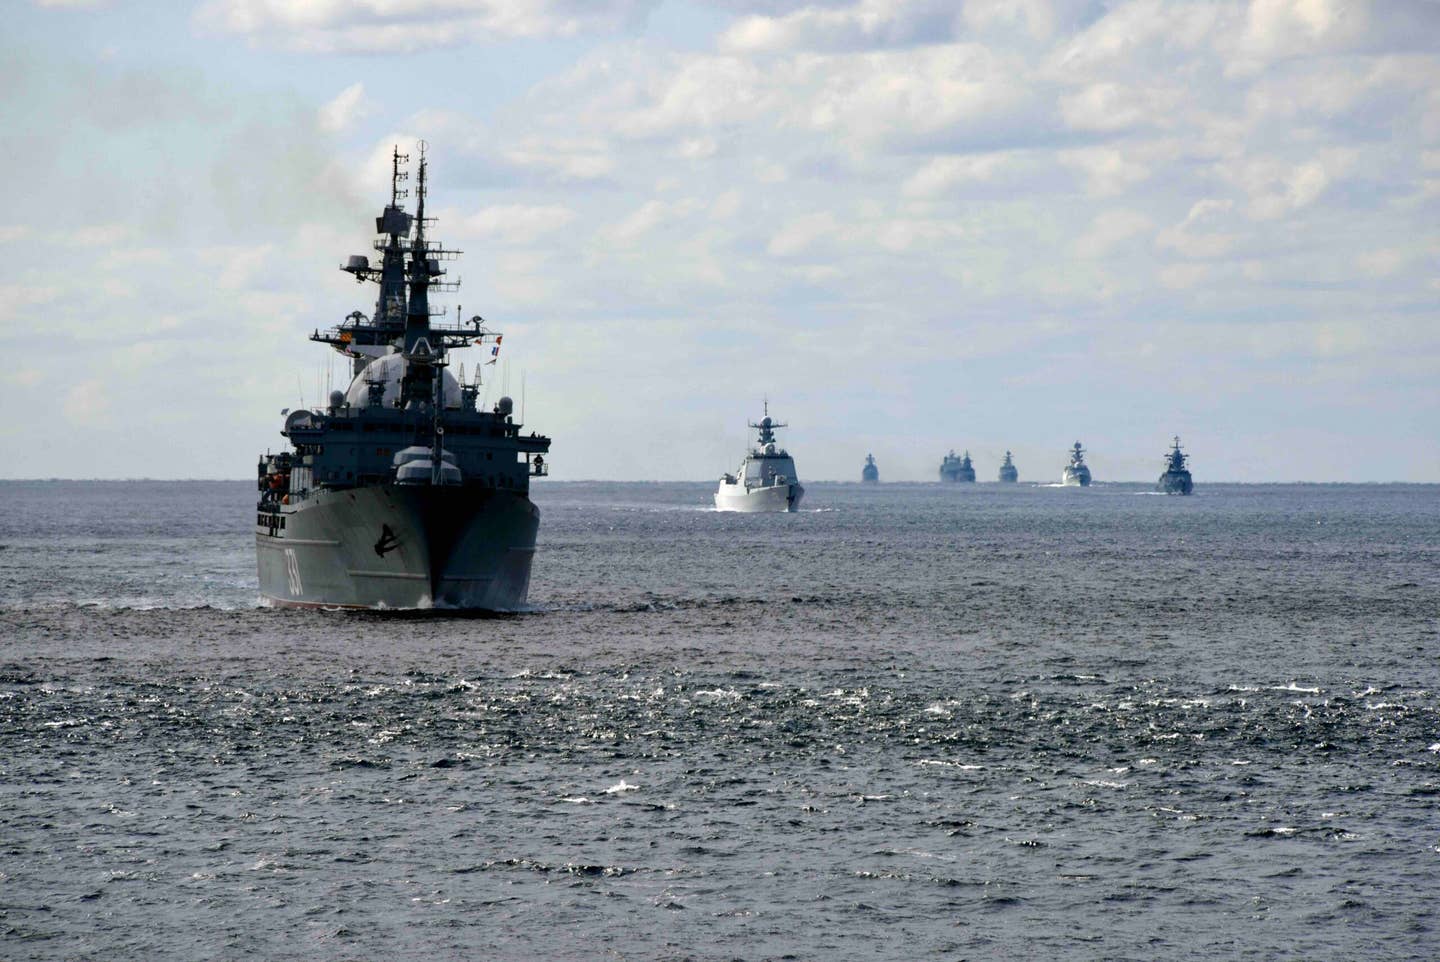 The warship formations of China and Russia sail through the Tsugaru Strait during the naval exercise Joint Sea-2021 on October 18, 2021, in the Western part of the Pacific Ocean.<em> Photo by Sun Zifa/China News Service via Getty Images</em>